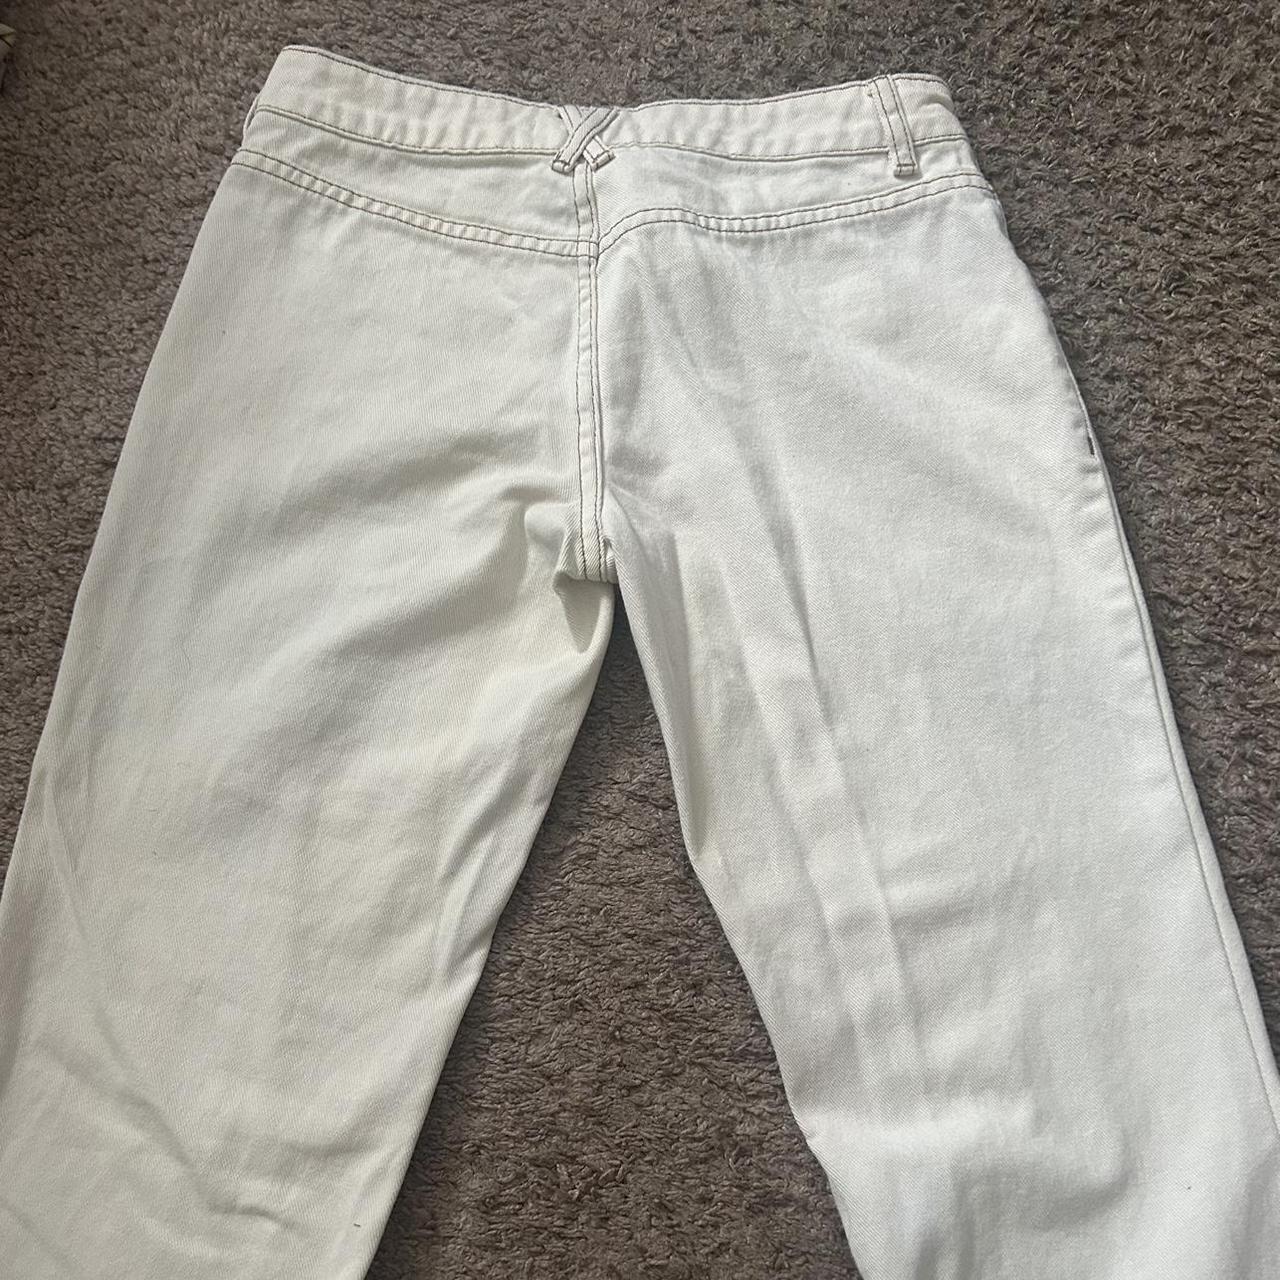 Low rise white flared jeans - Depop